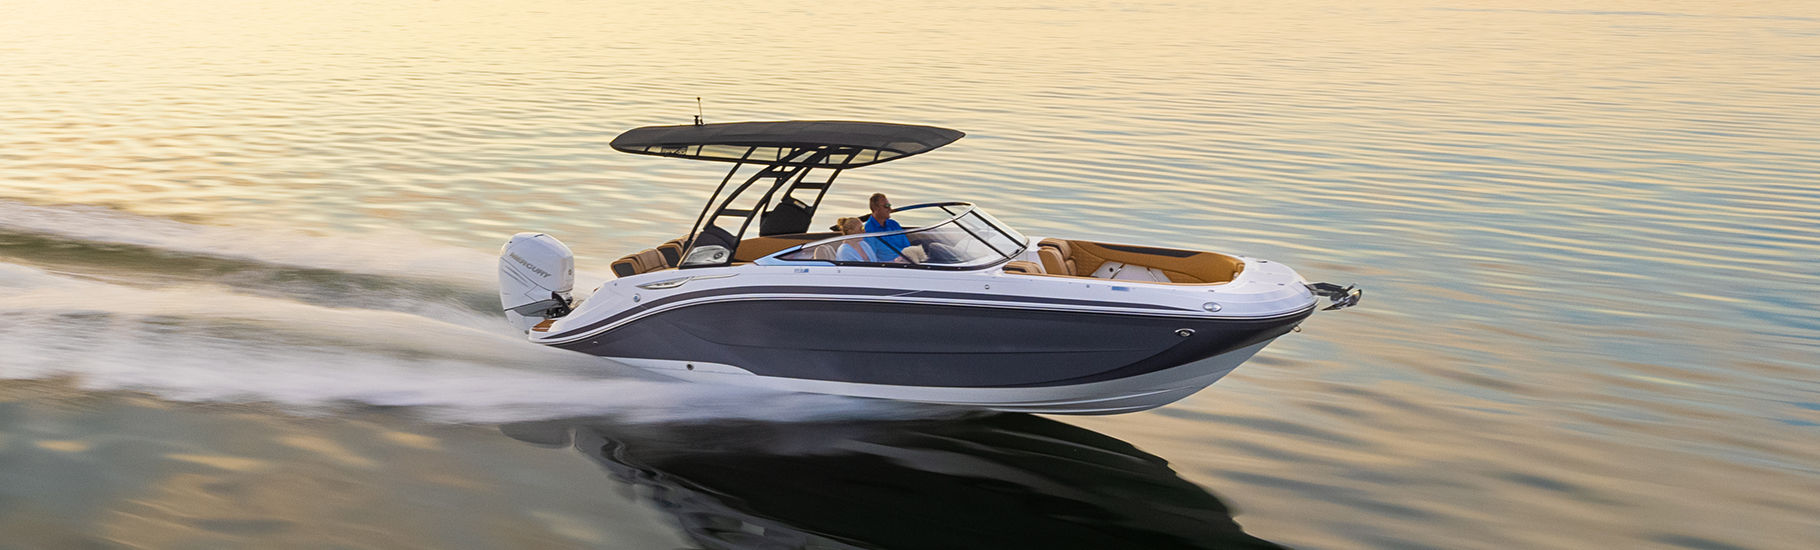 TIPS FOR FIRST-TIME BOAT BUYERS 